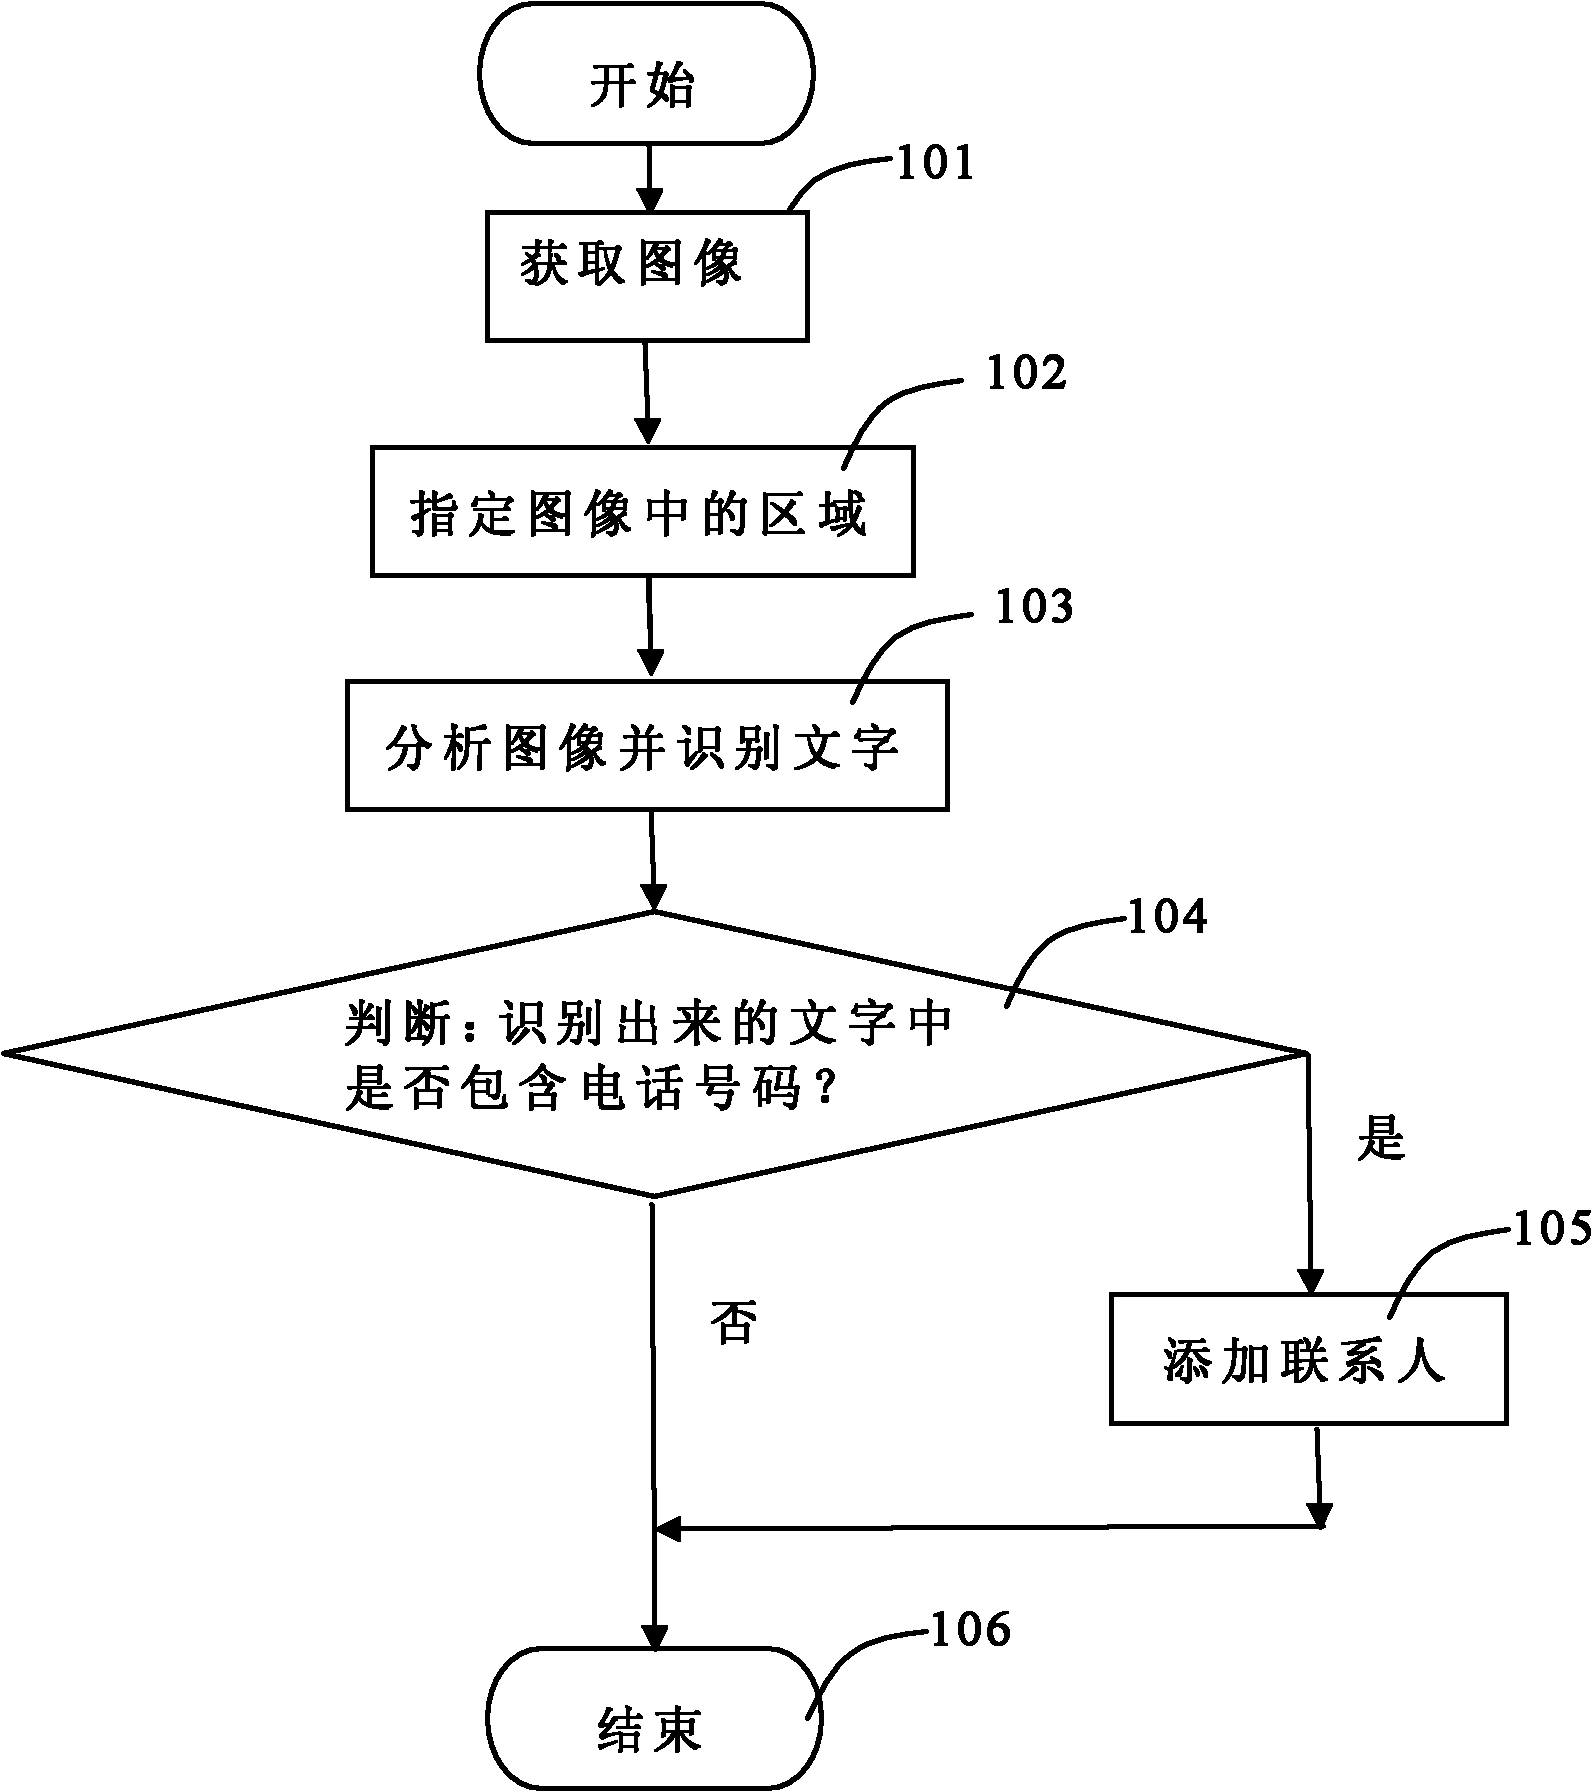 Method for automatically judging telephone number and adding contact